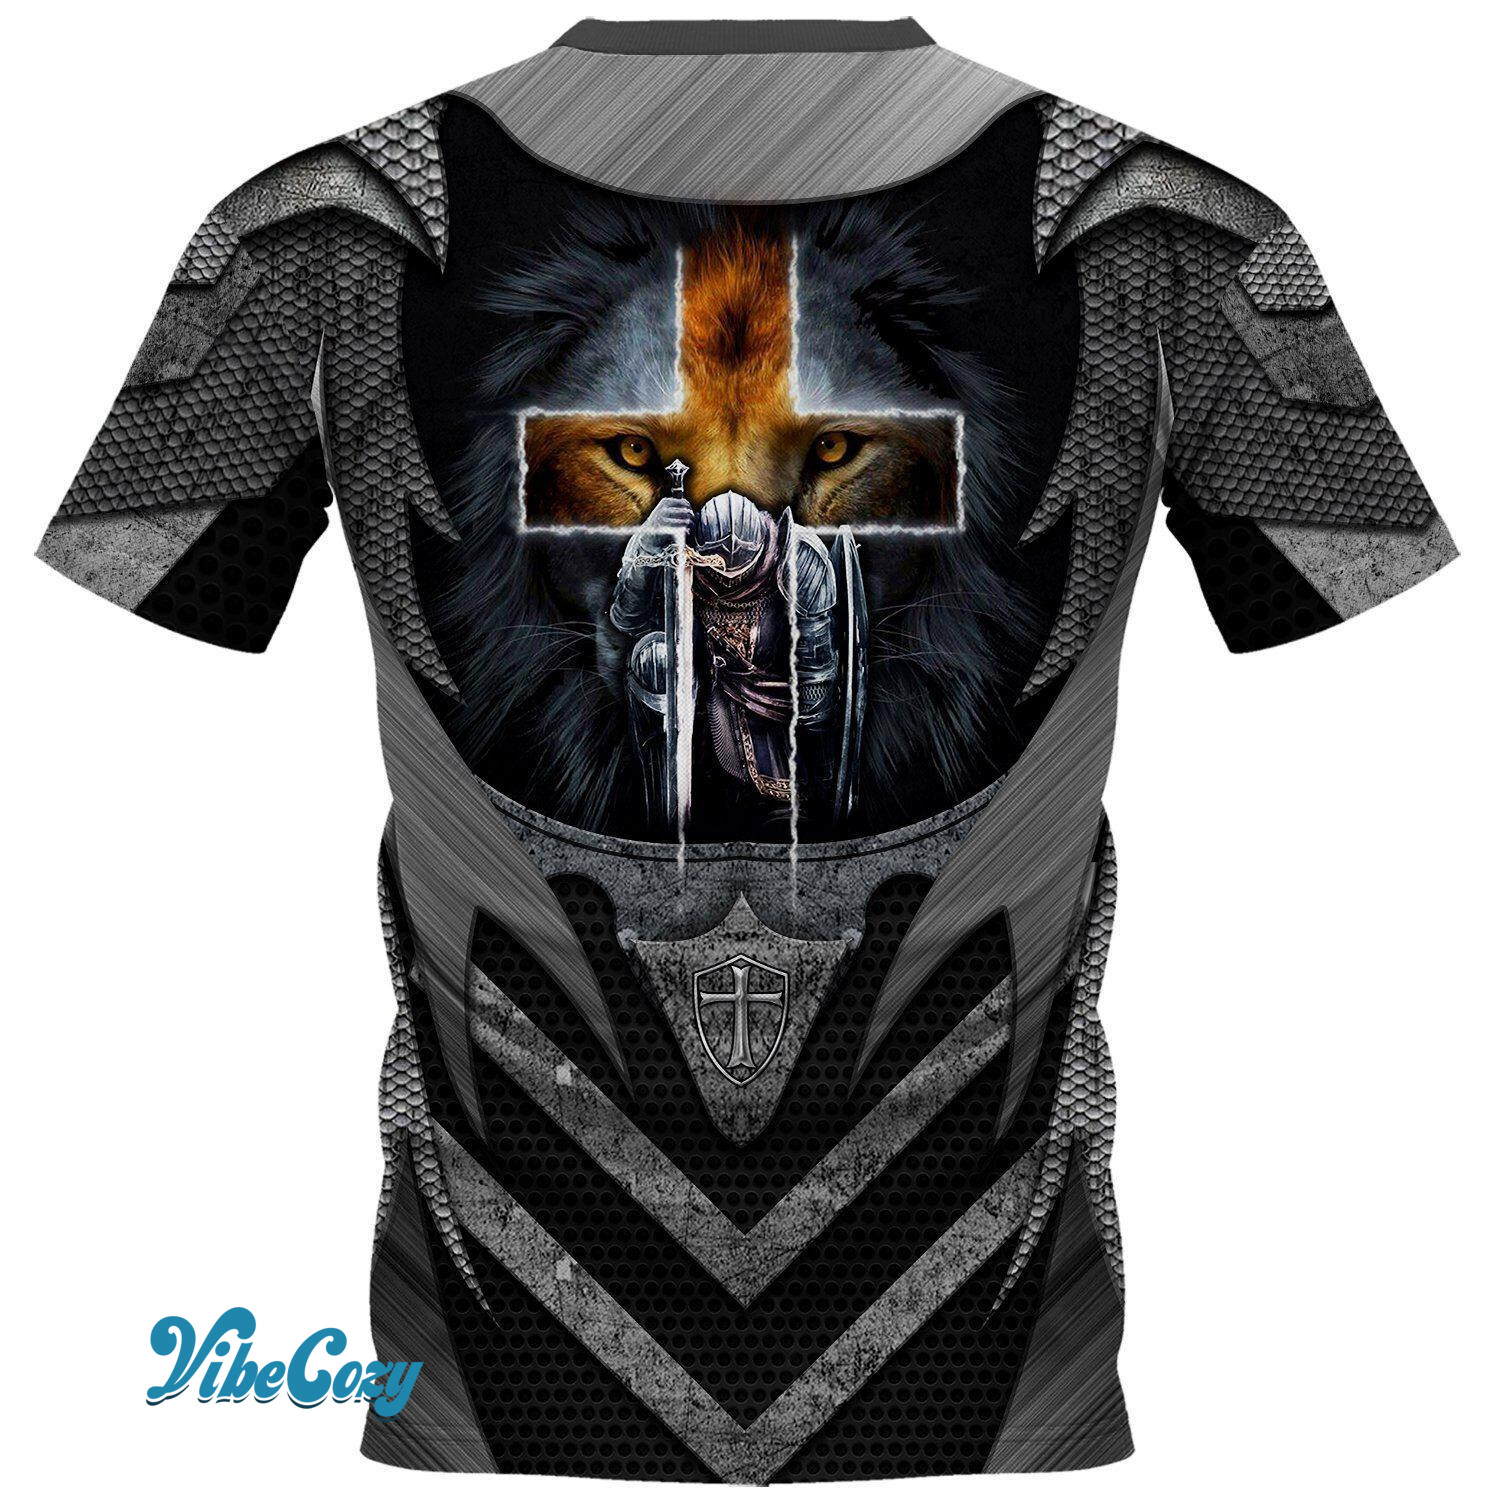 Knight Templar 3D All Over Printed Shirt Hoodie MP928